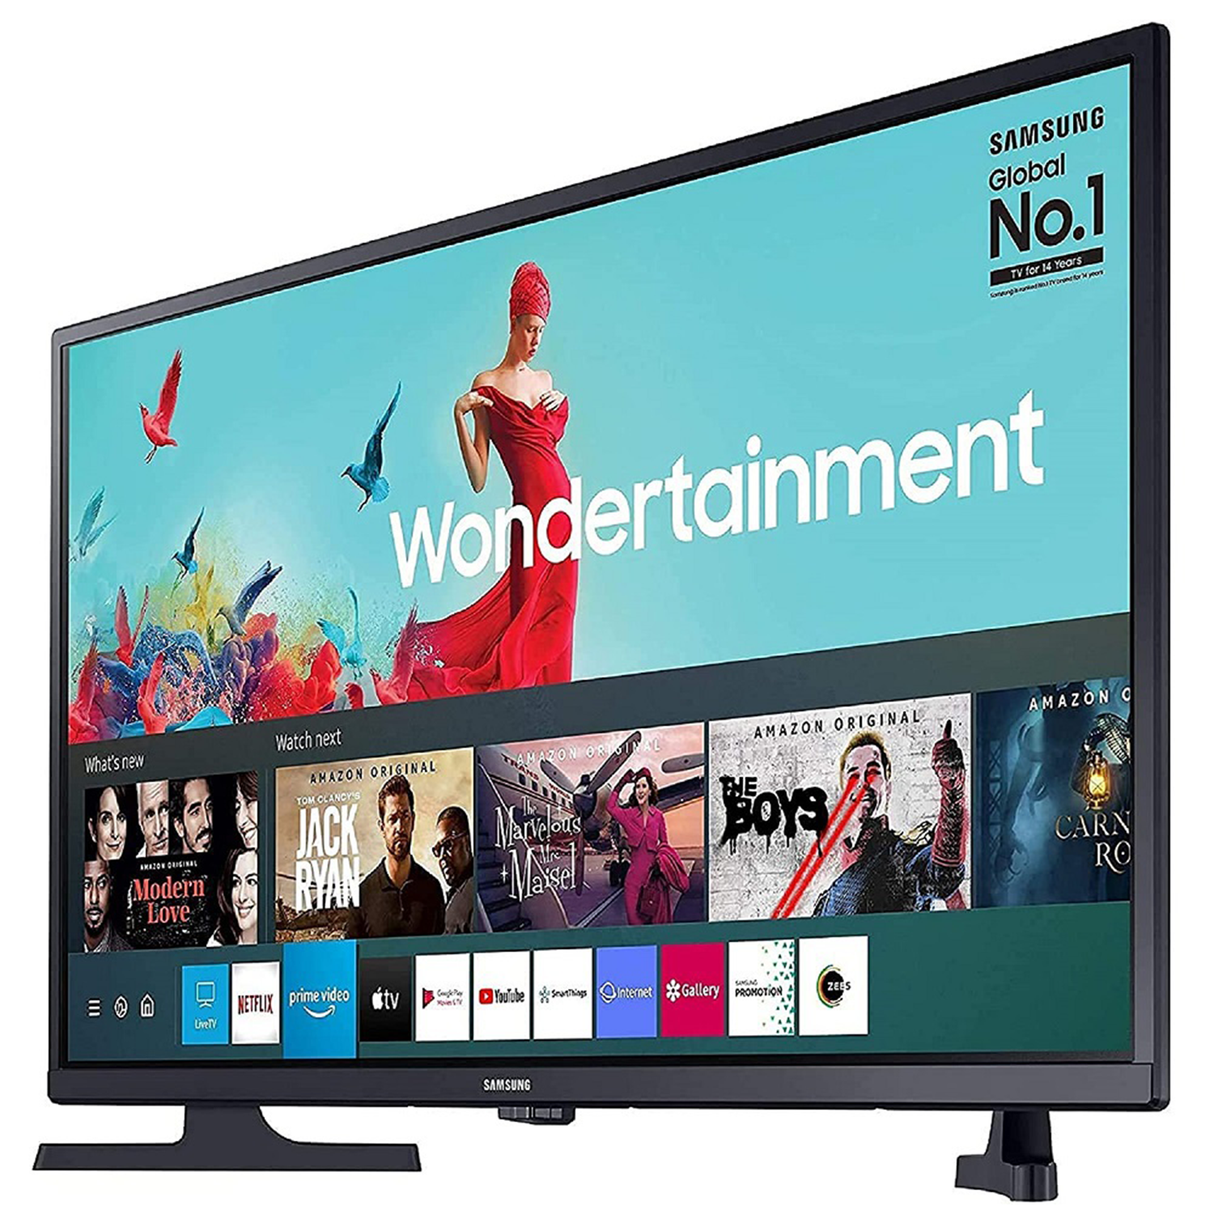 Samsung 32" HD Smart Tizen TV – redefine your TV experience with cutting-edge technology.